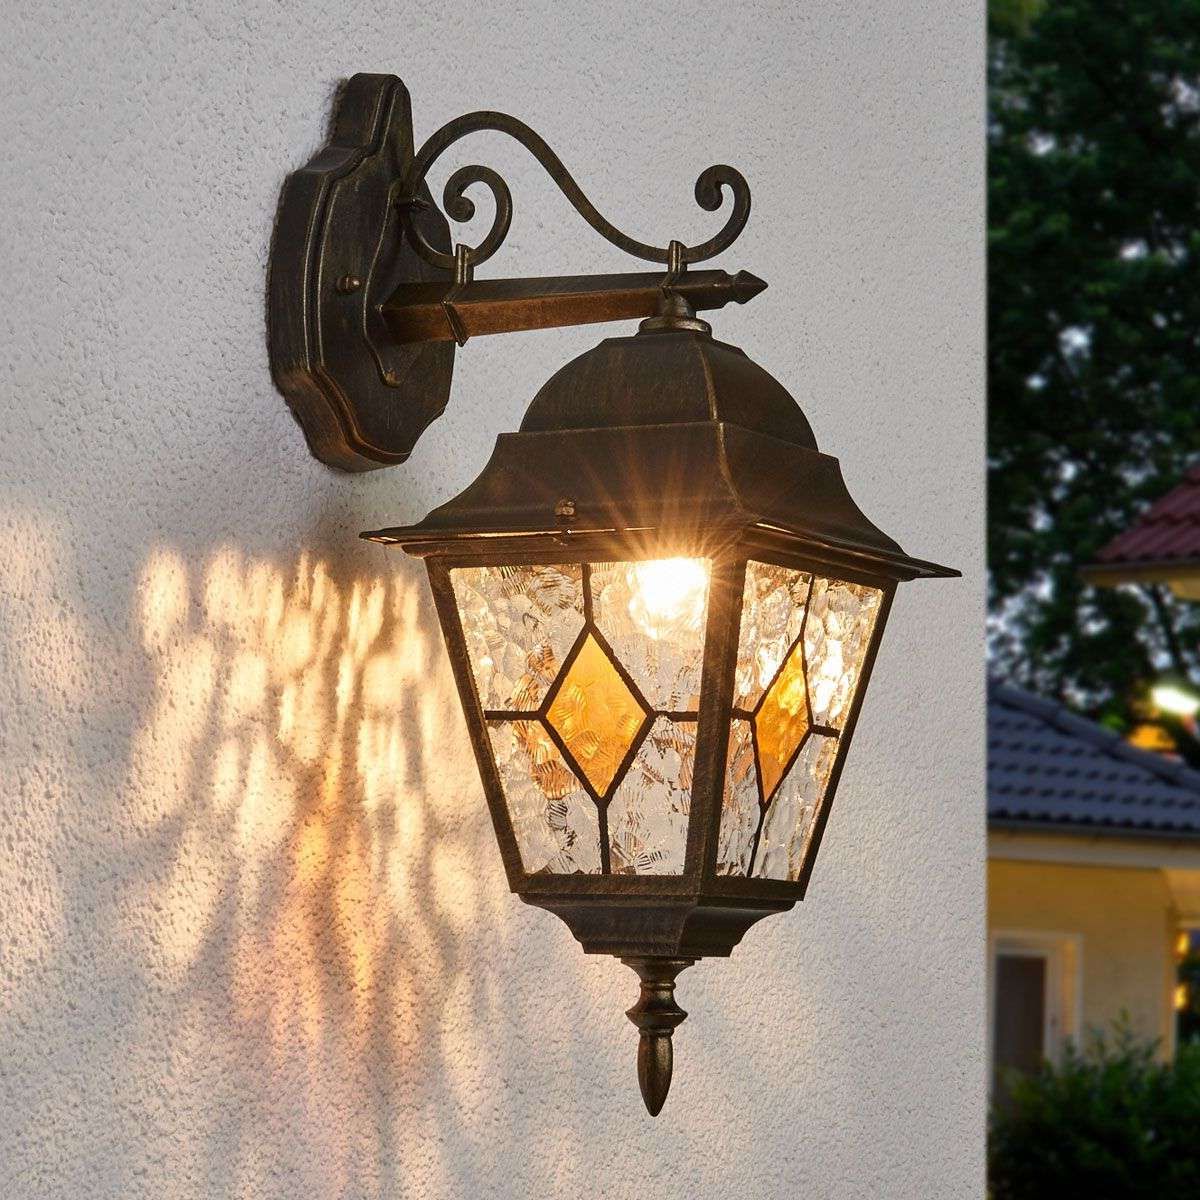 Widely Used Jaceton Black Outdoor Wall Lanterns Inside Jason Traditional Outdoor Wall Light (View 8 of 20)